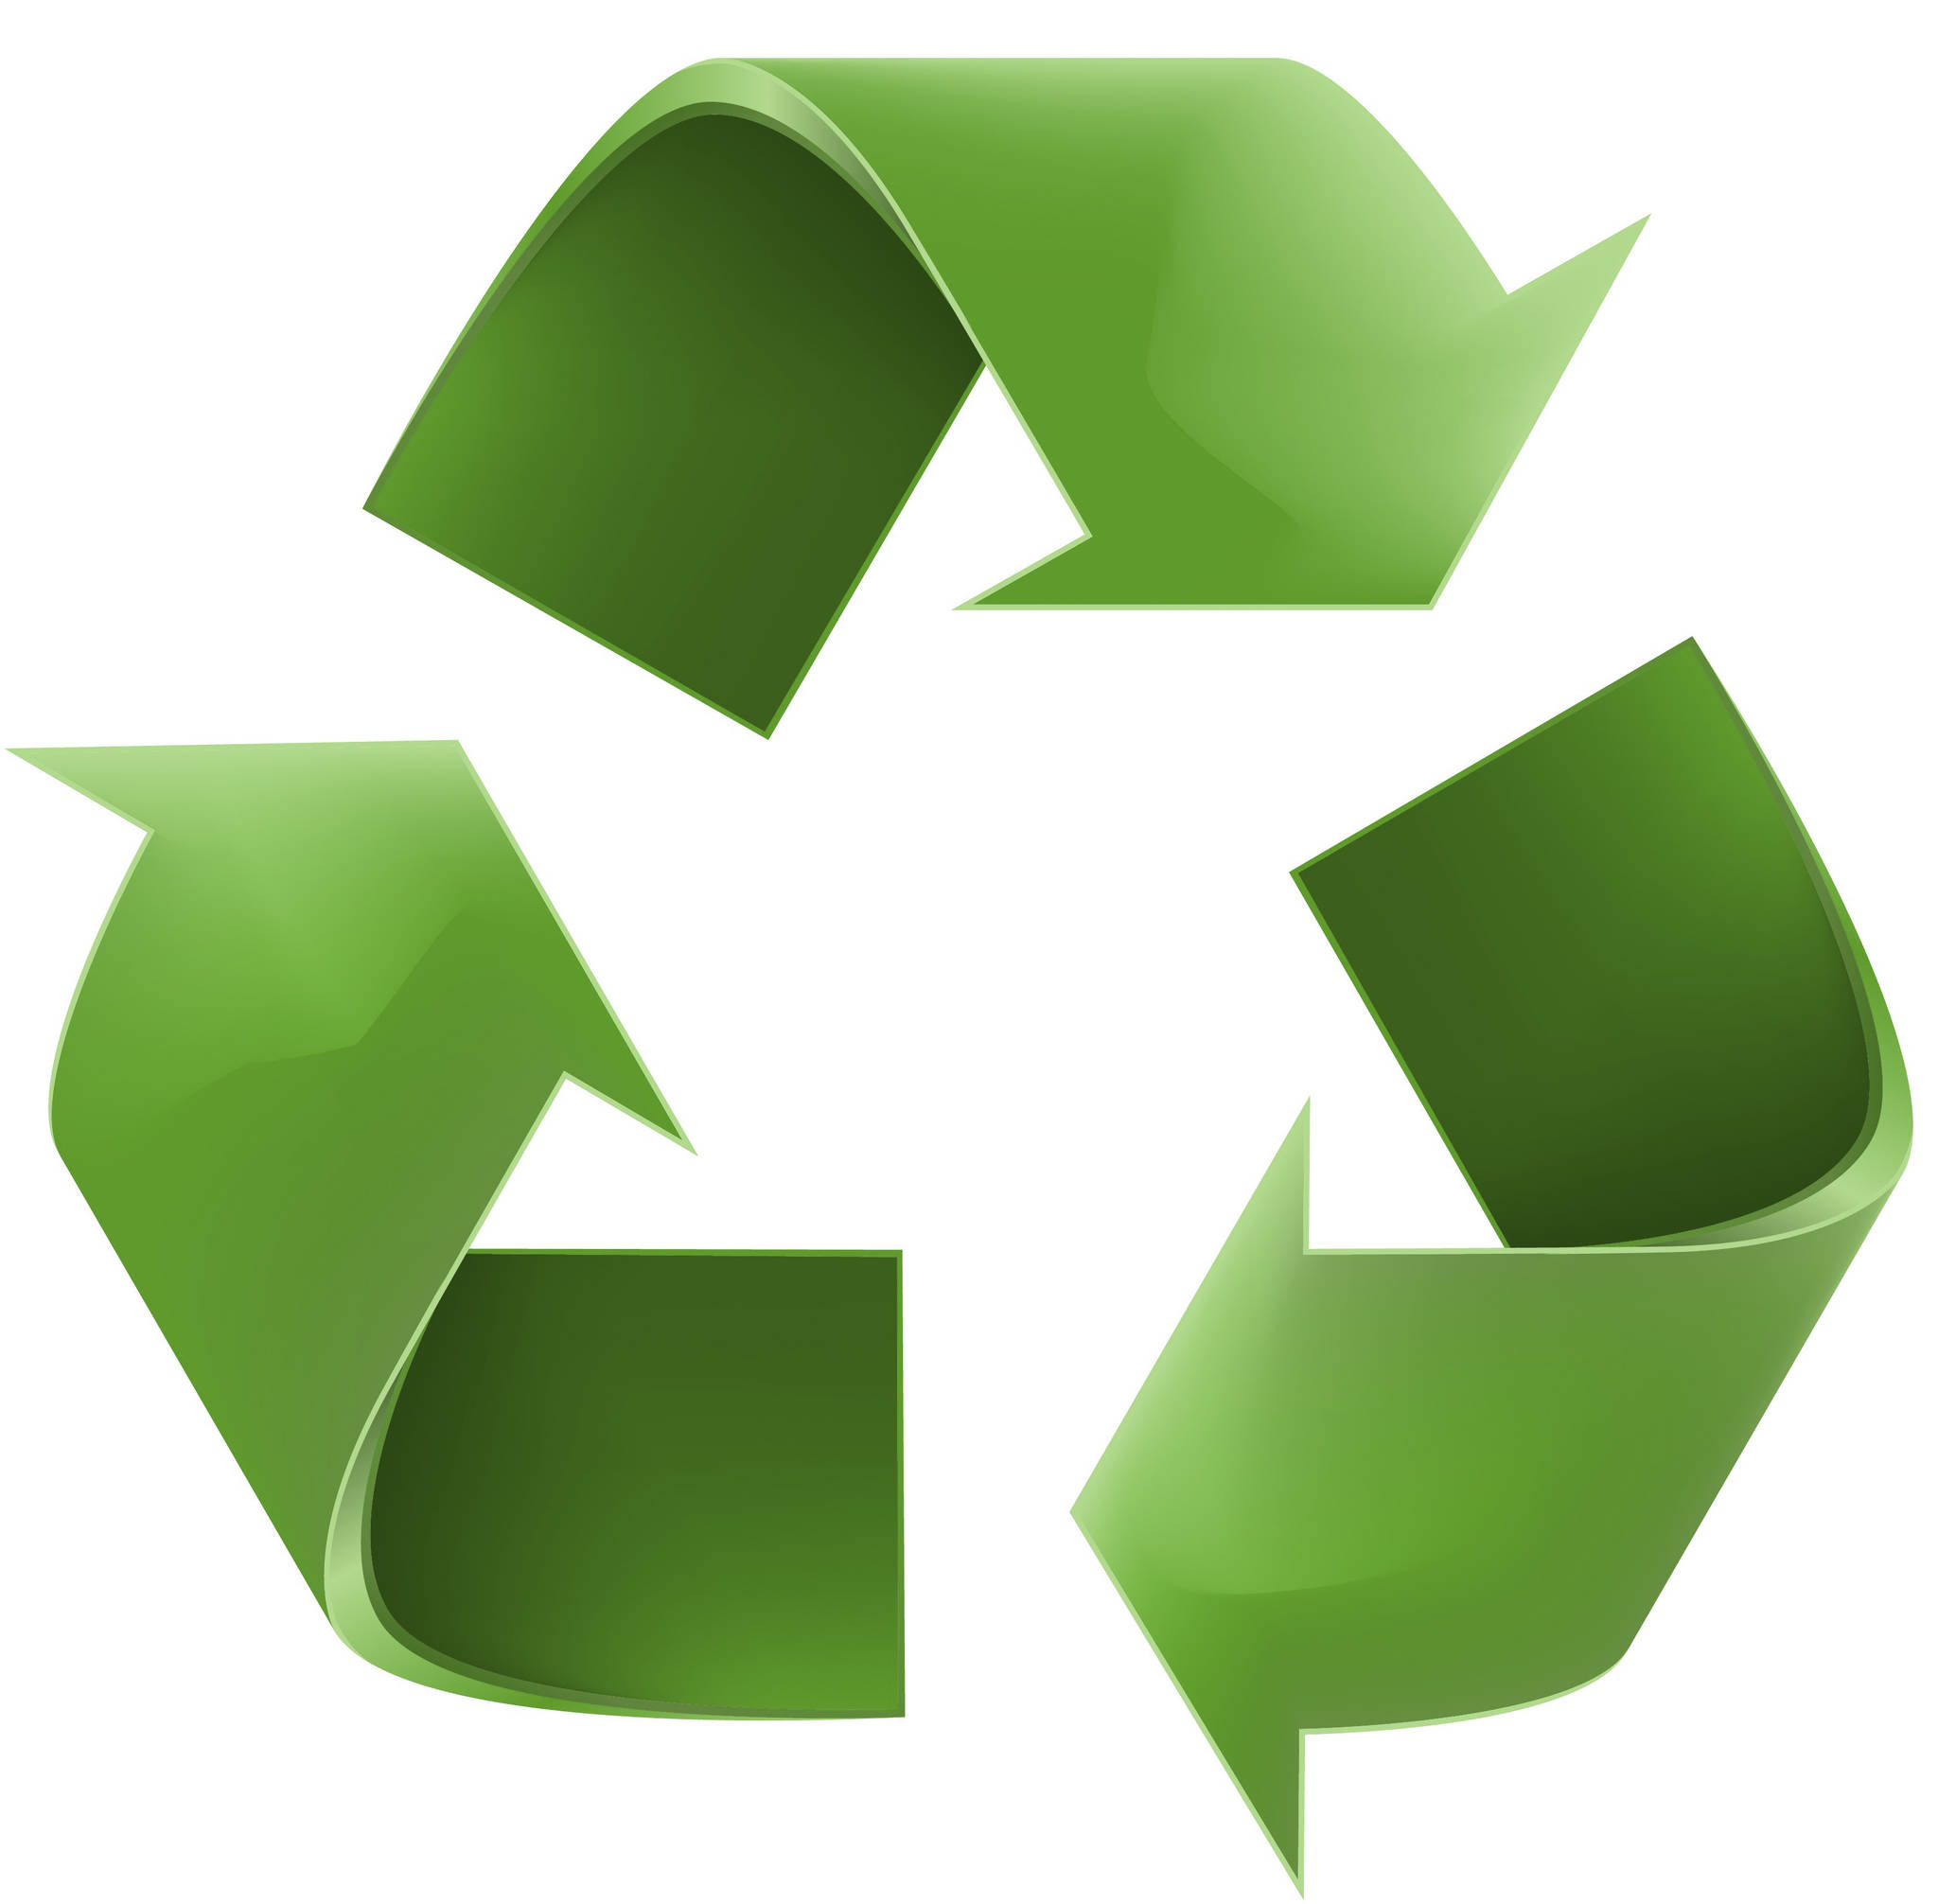 Recycling myths: sorting fact from fiction